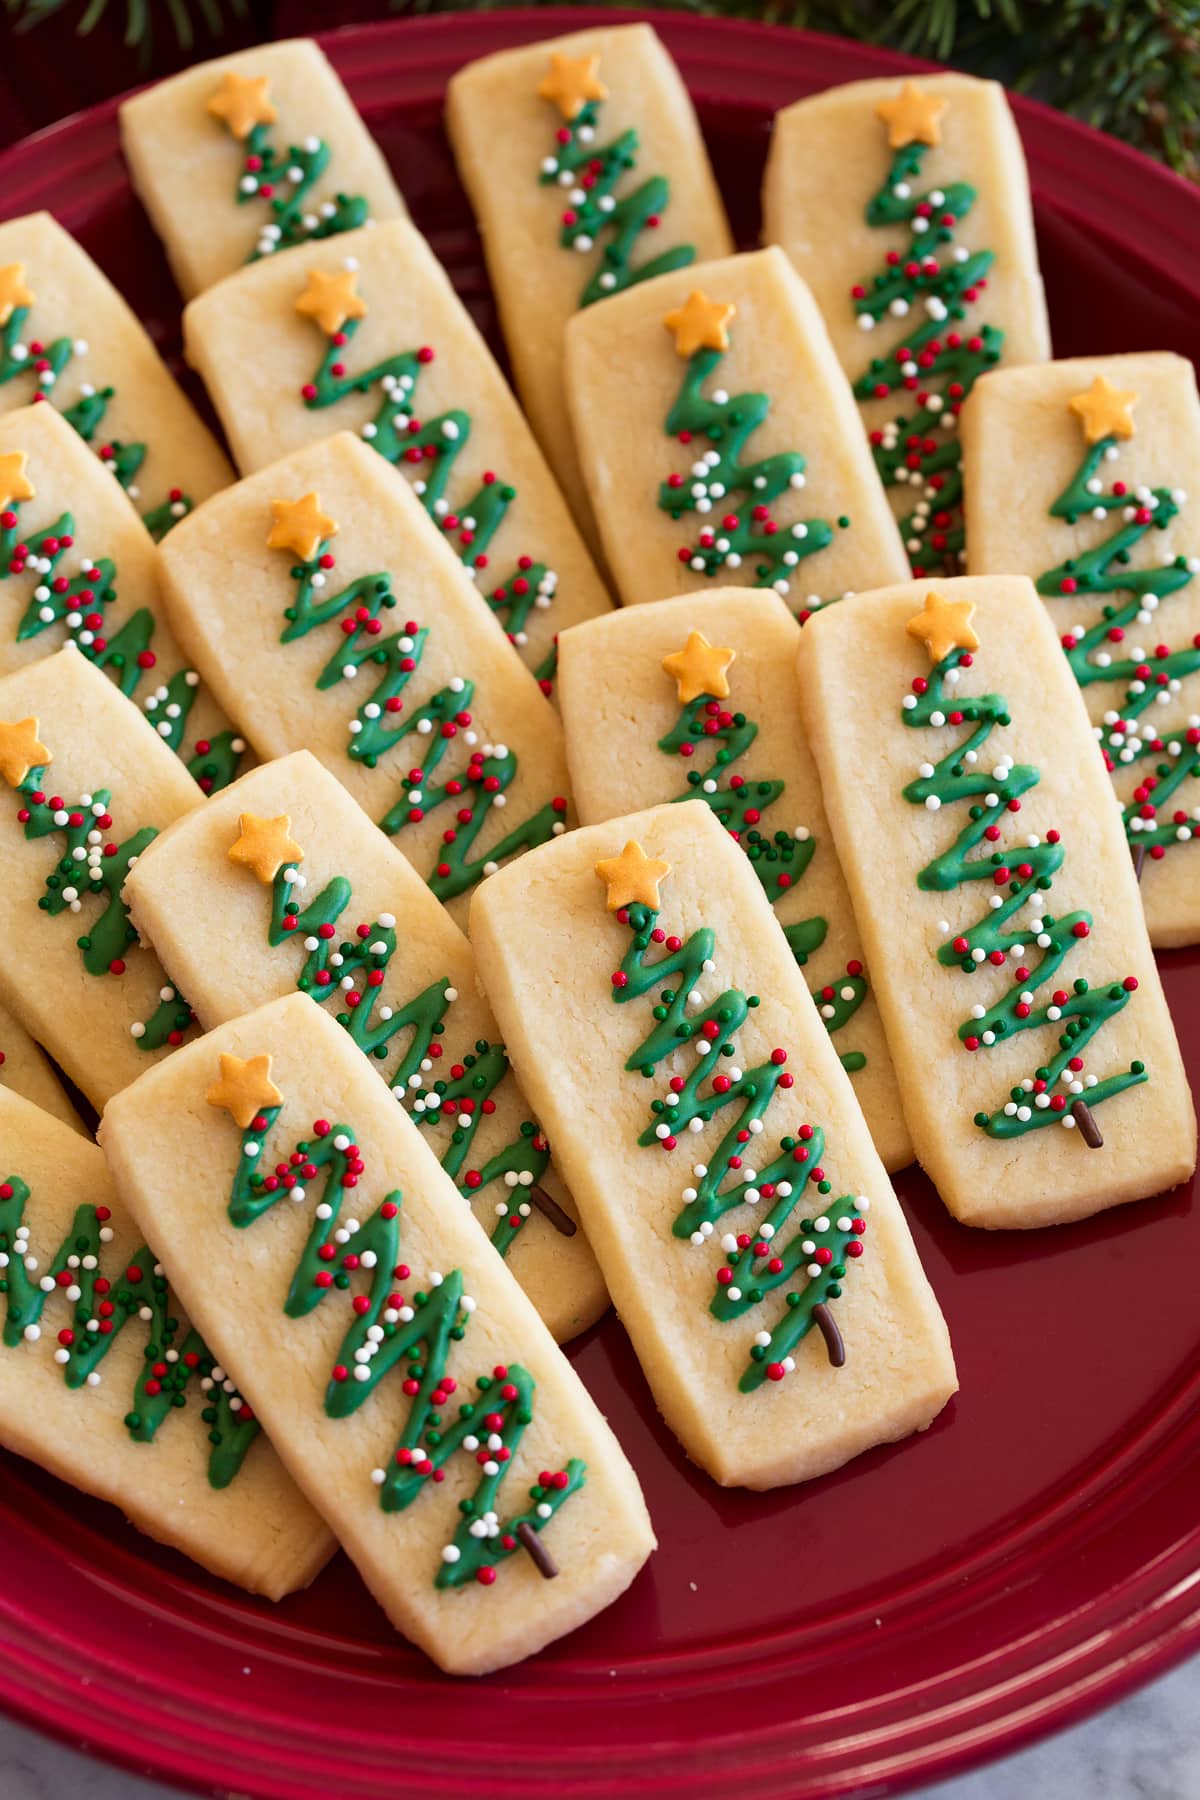 Shortbread cookies with a icing tree decoration.